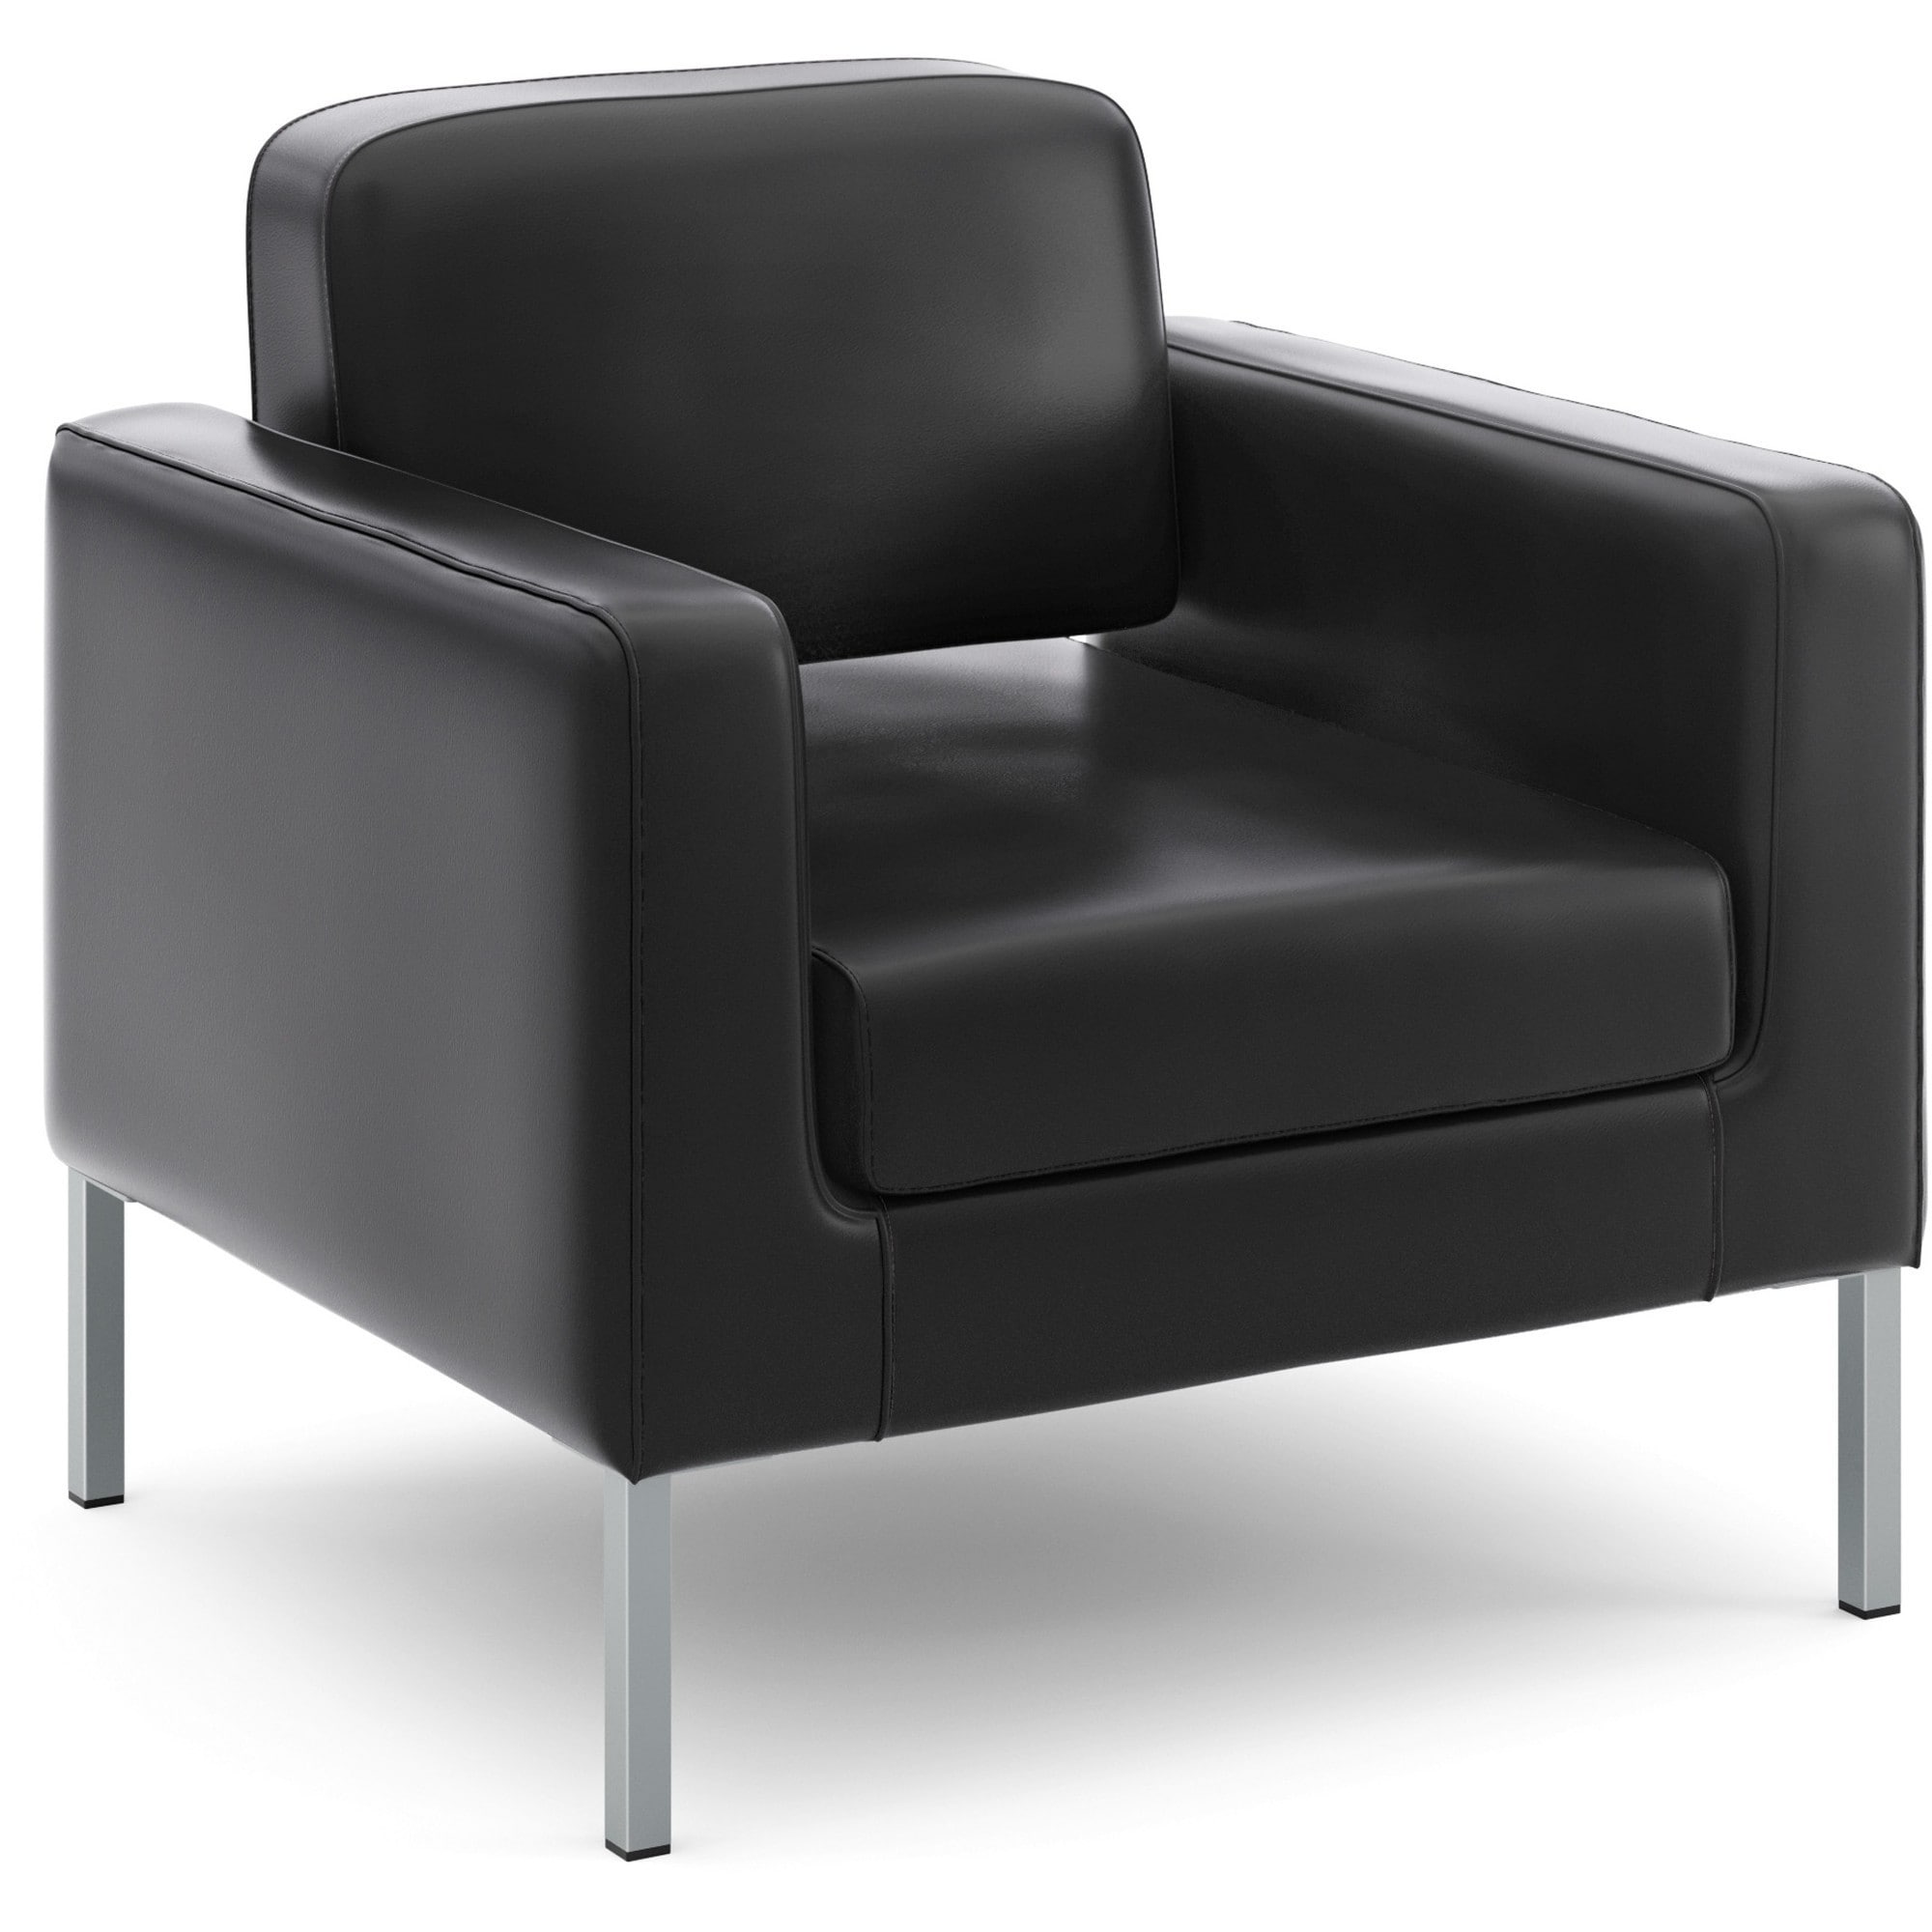 basyx by HON VL887 Black Leather Lounge Seating Series Club Chair